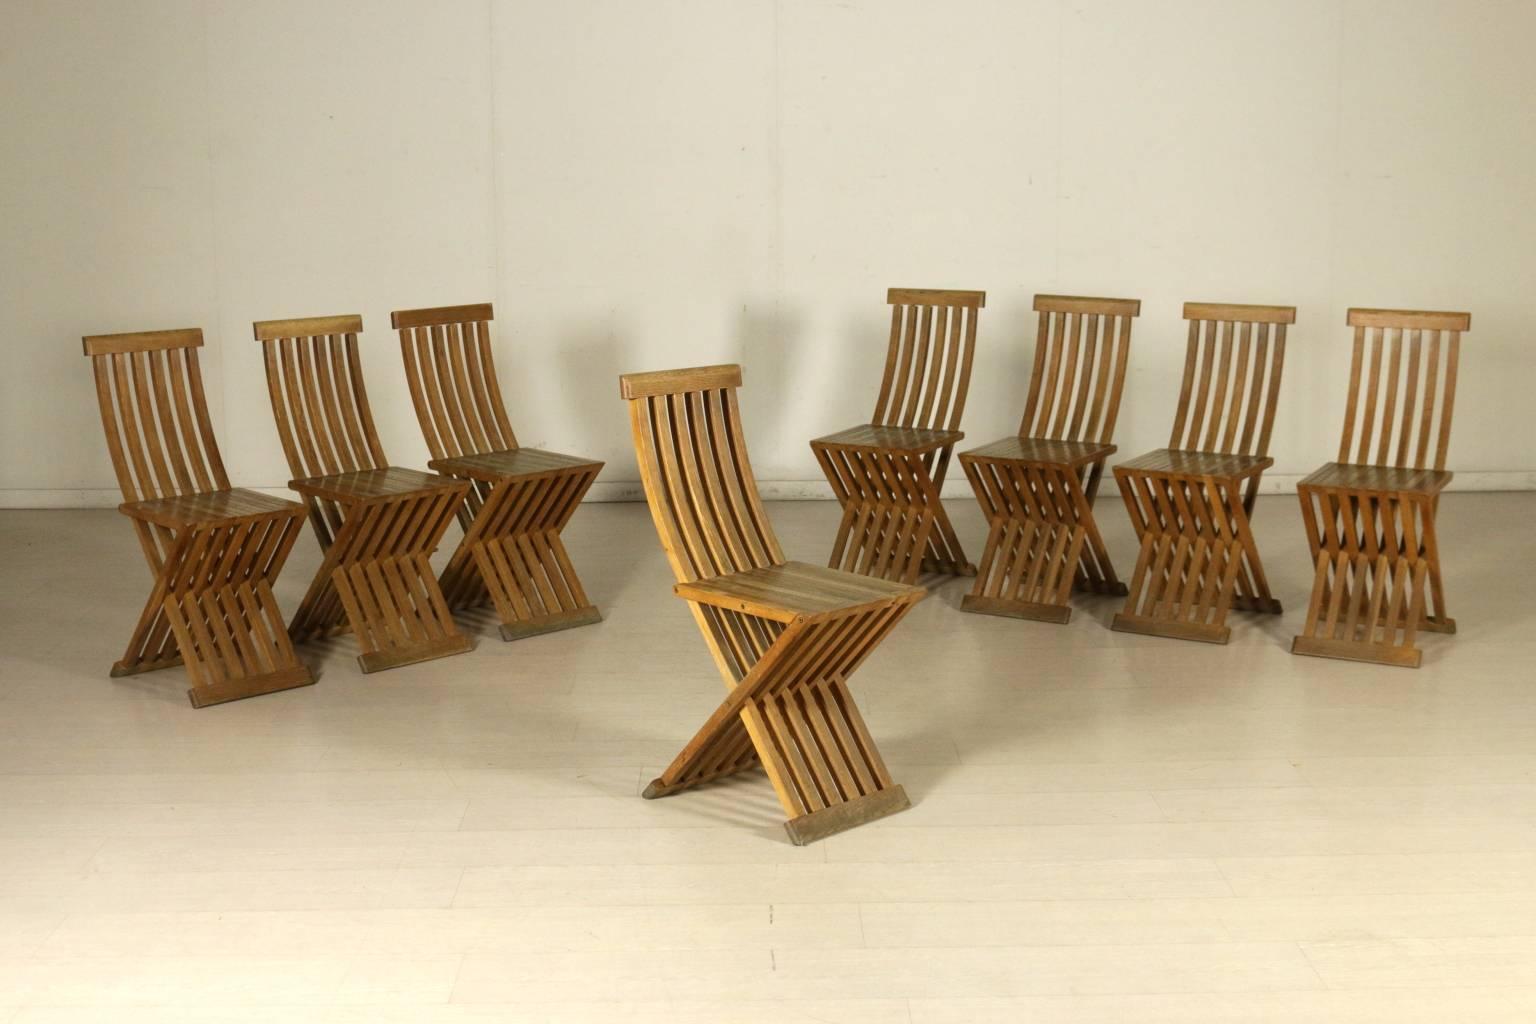 A group of eight natural oak folding chairs designed by Studio Simon for Cassina. The model Tomasa is inspired by the chair designed by Paolo Uccello, with a change in the curves and a reduction of the number of wooden elements. Manufactured in